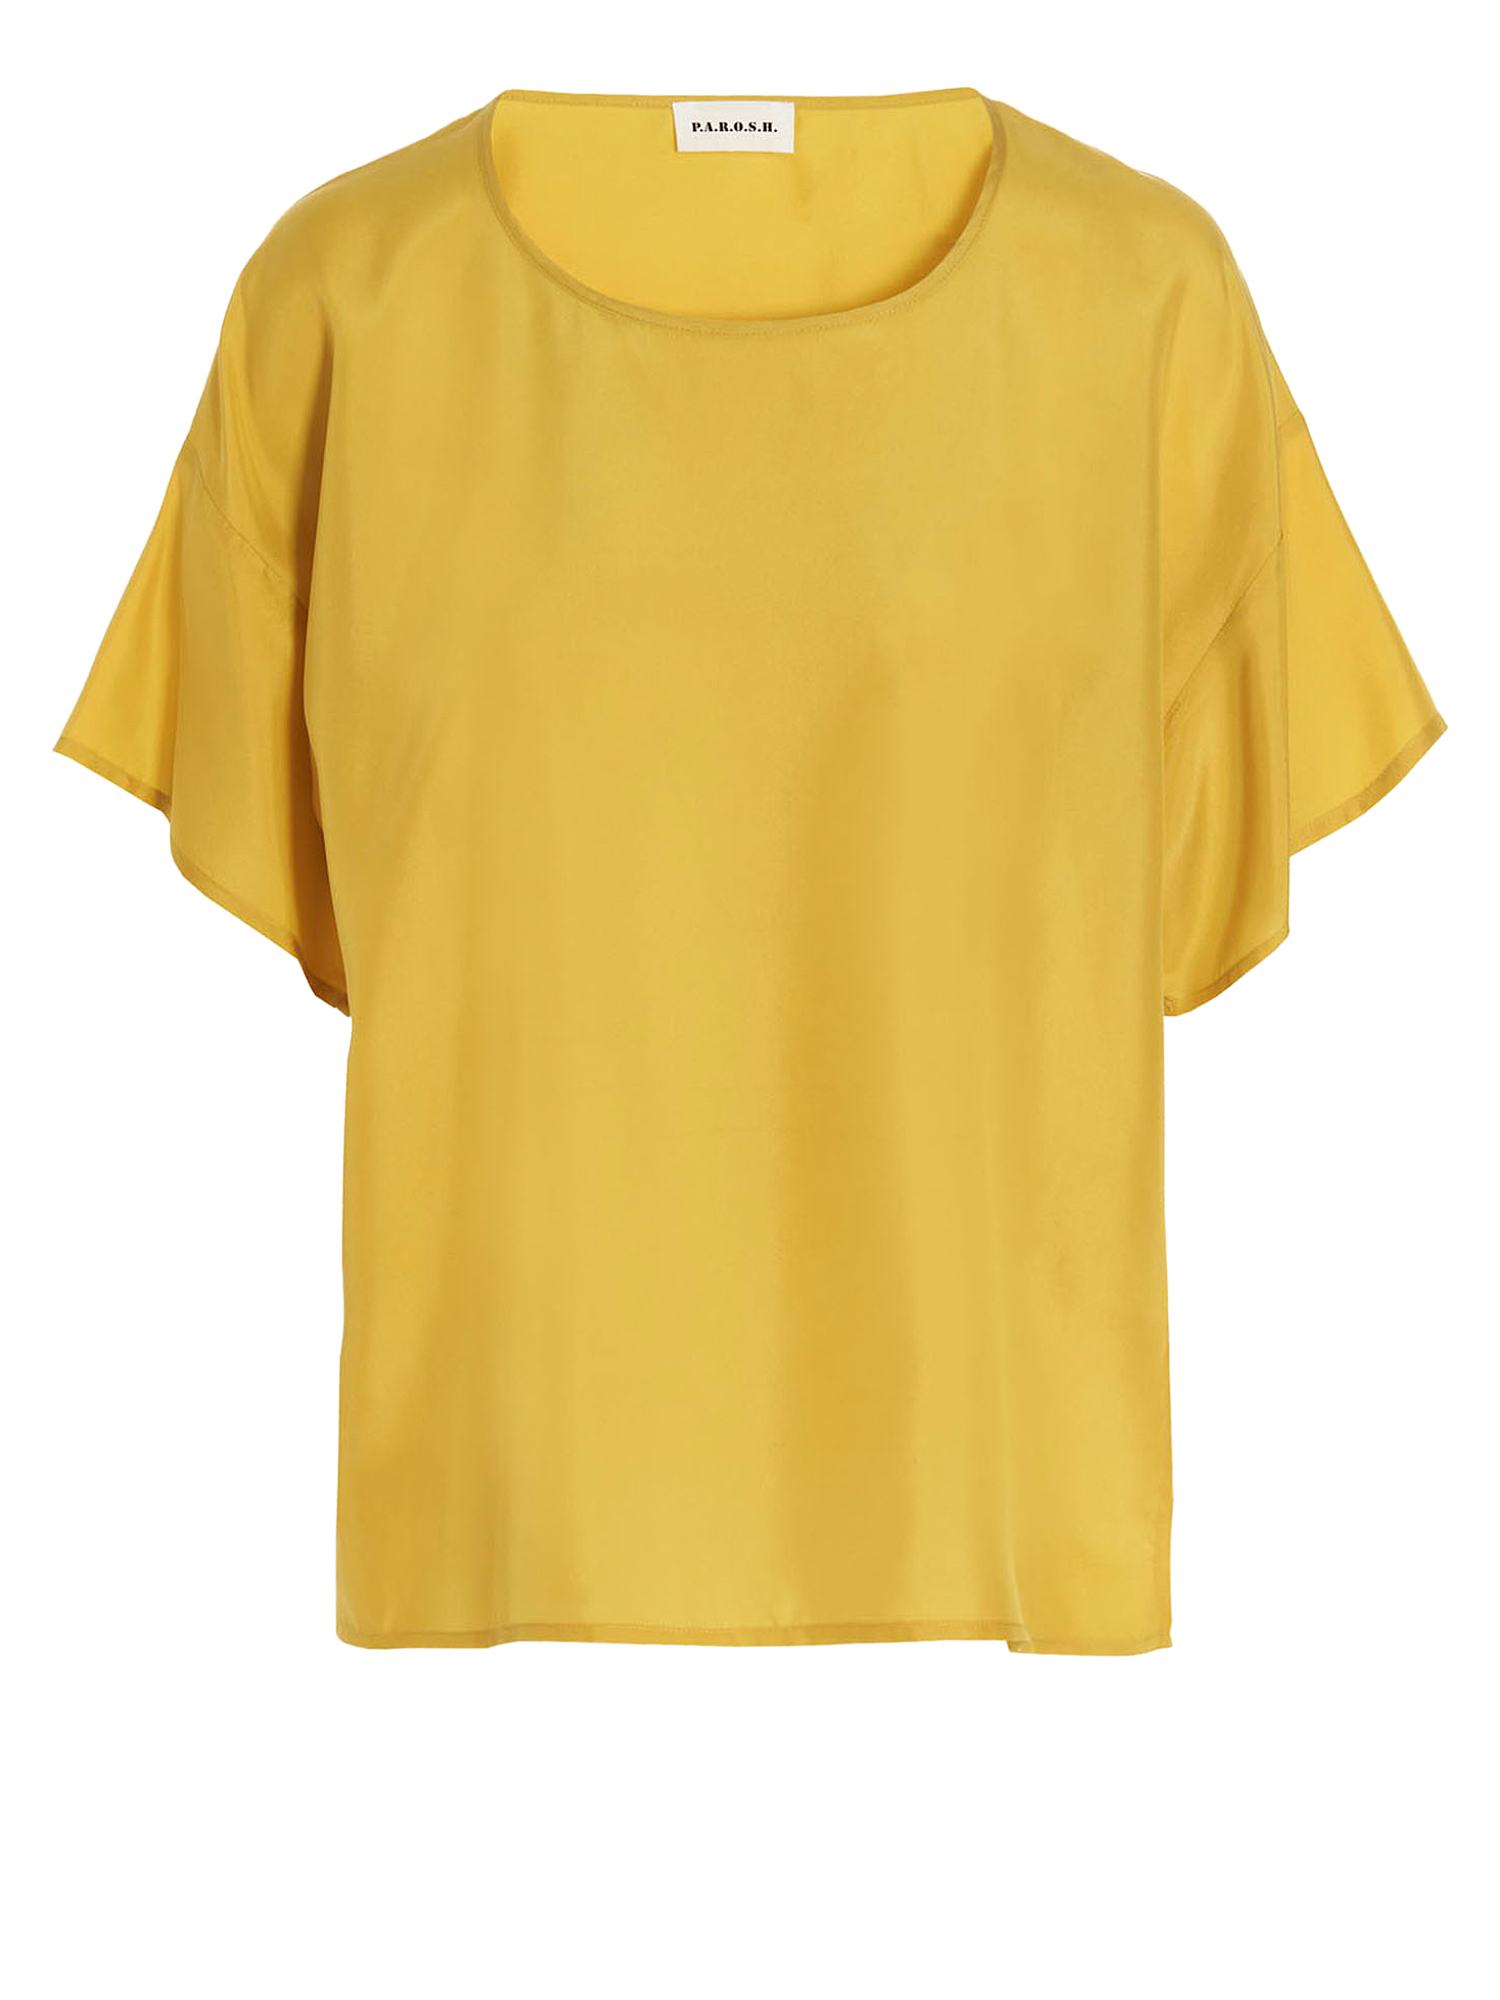 Condition: New With Tag,  Silk, Color: Yellow - M - M -